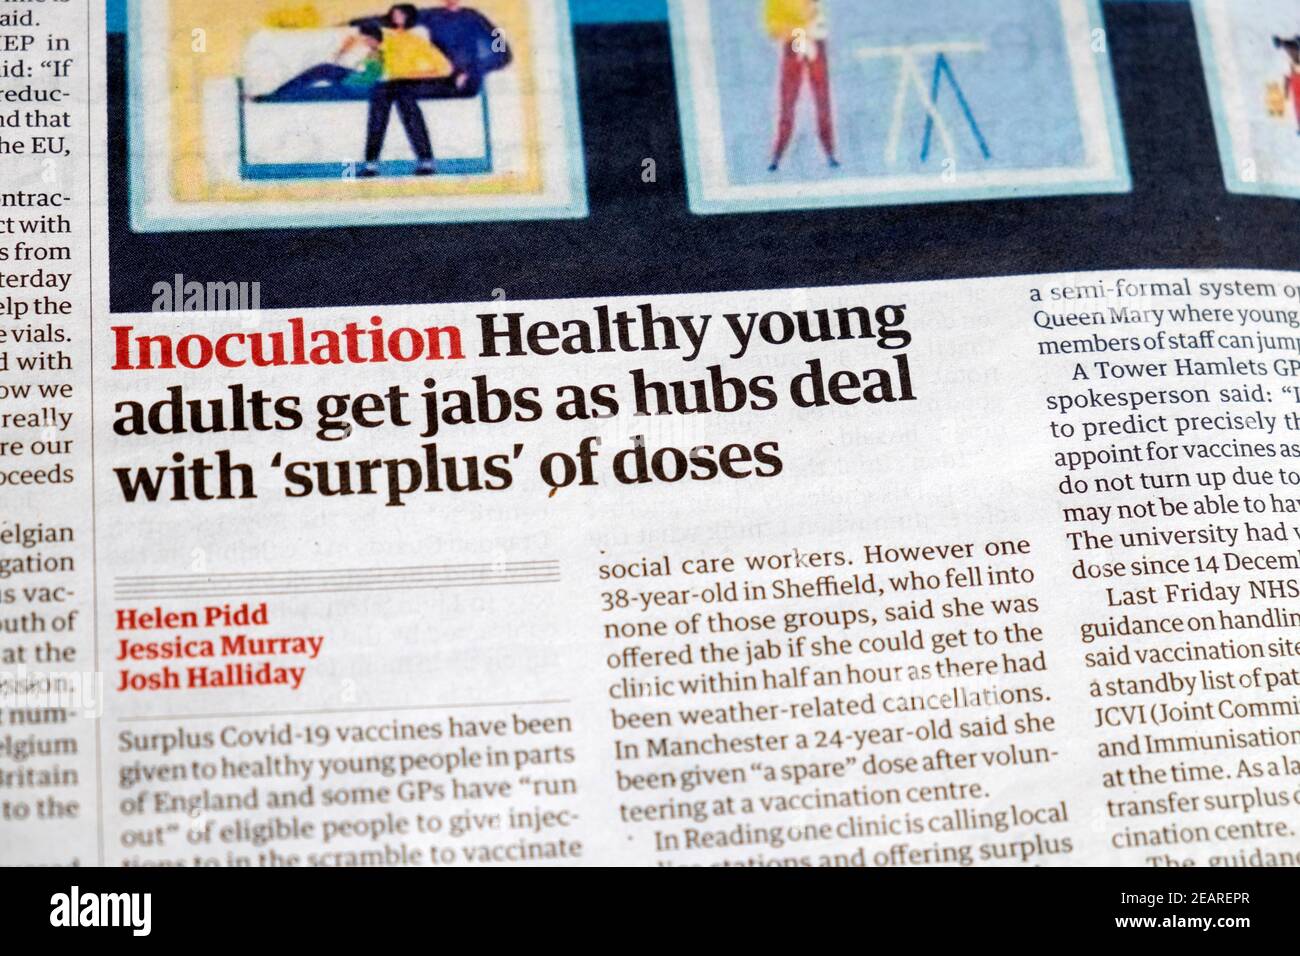 'Inoculation Healthy young adults get jabs as hubs deal with 'surplus' of doses' Guardian newspaper headline article page 29 January 2021 London UK Stock Photo